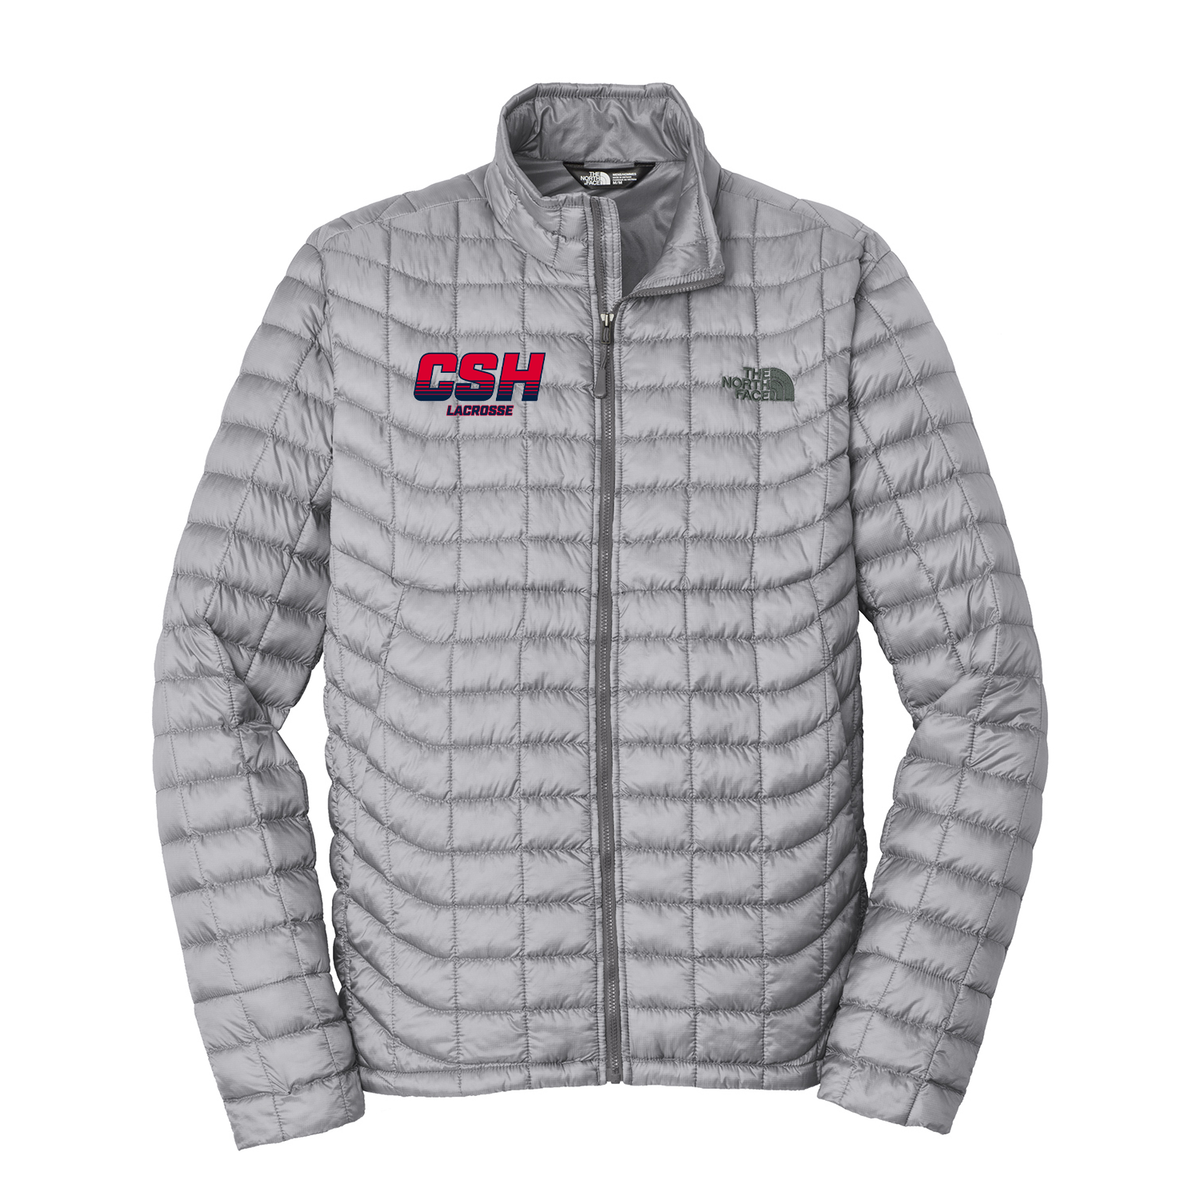 Cold Spring Harbor PAL The North Face ThermoBall Jacket